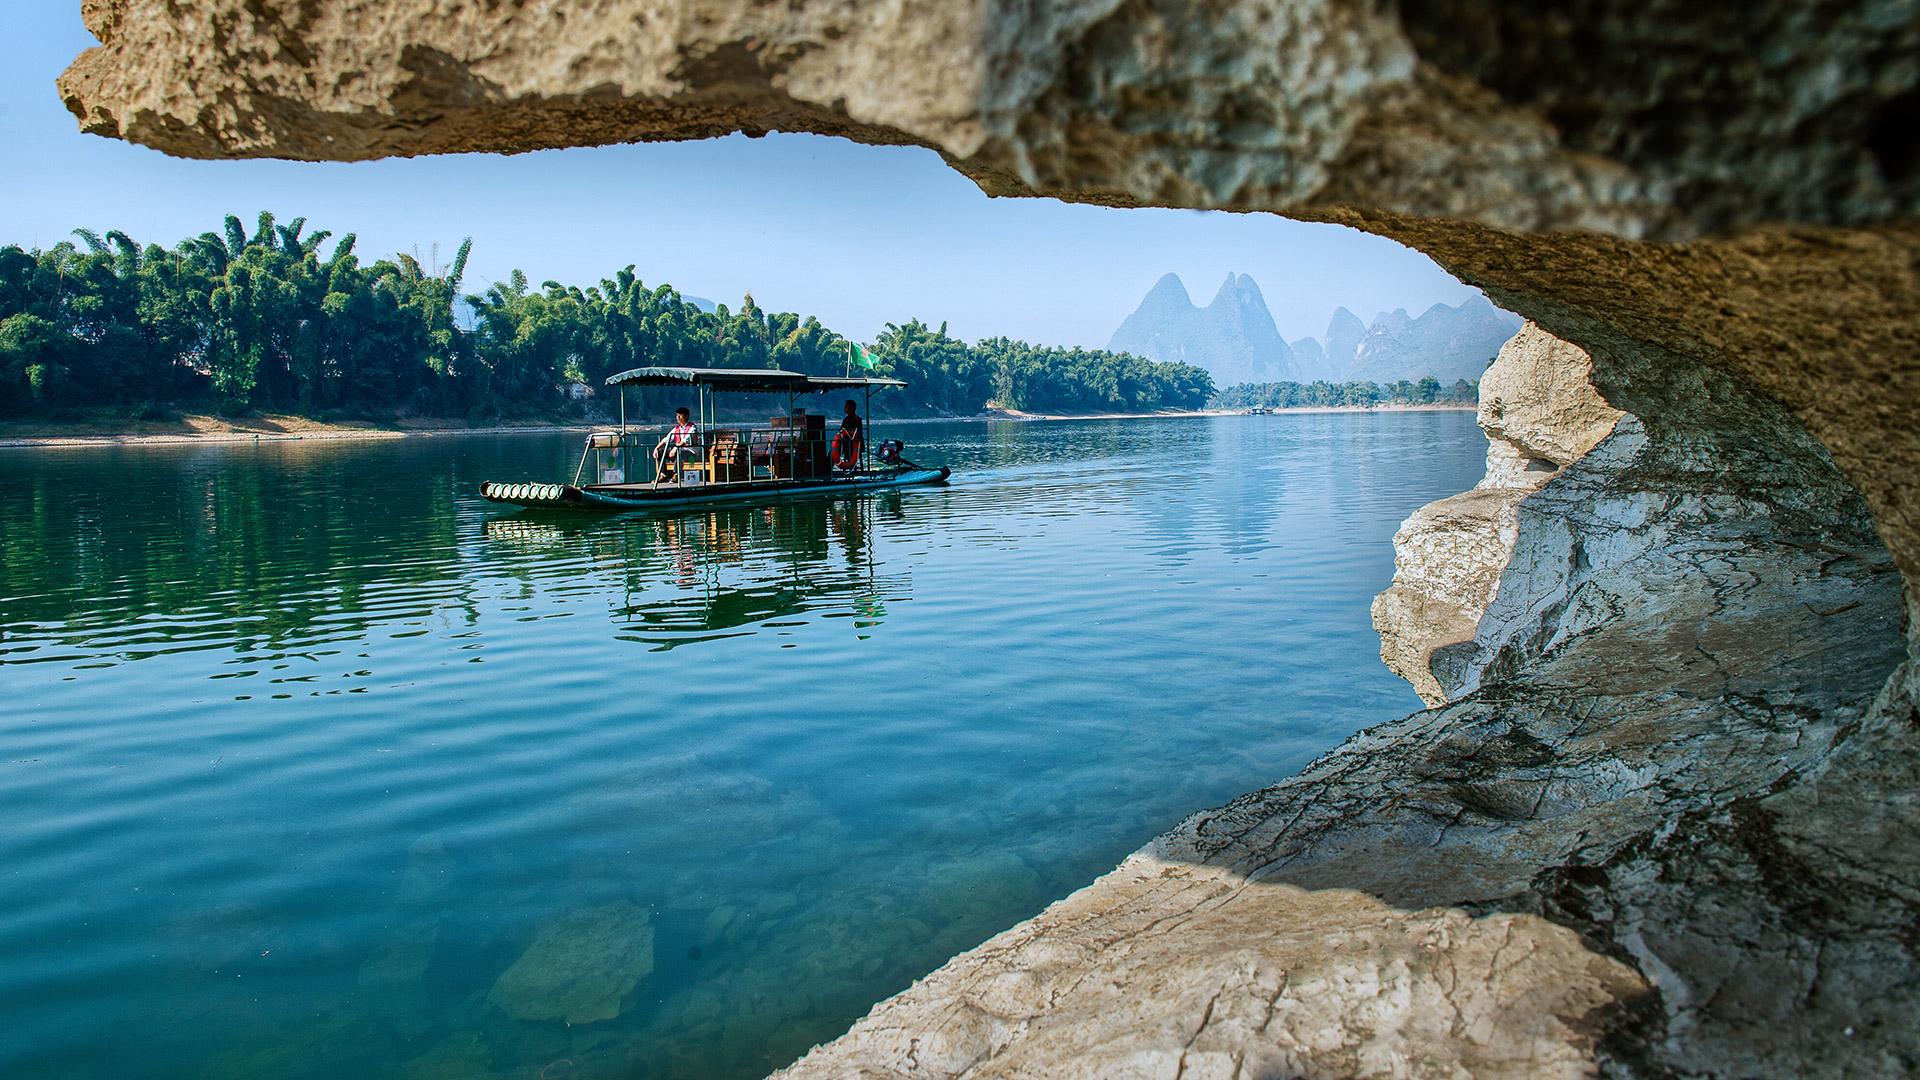 Top Things To Do In Yangshuo - Banyan Tree River Rafting and Cruises